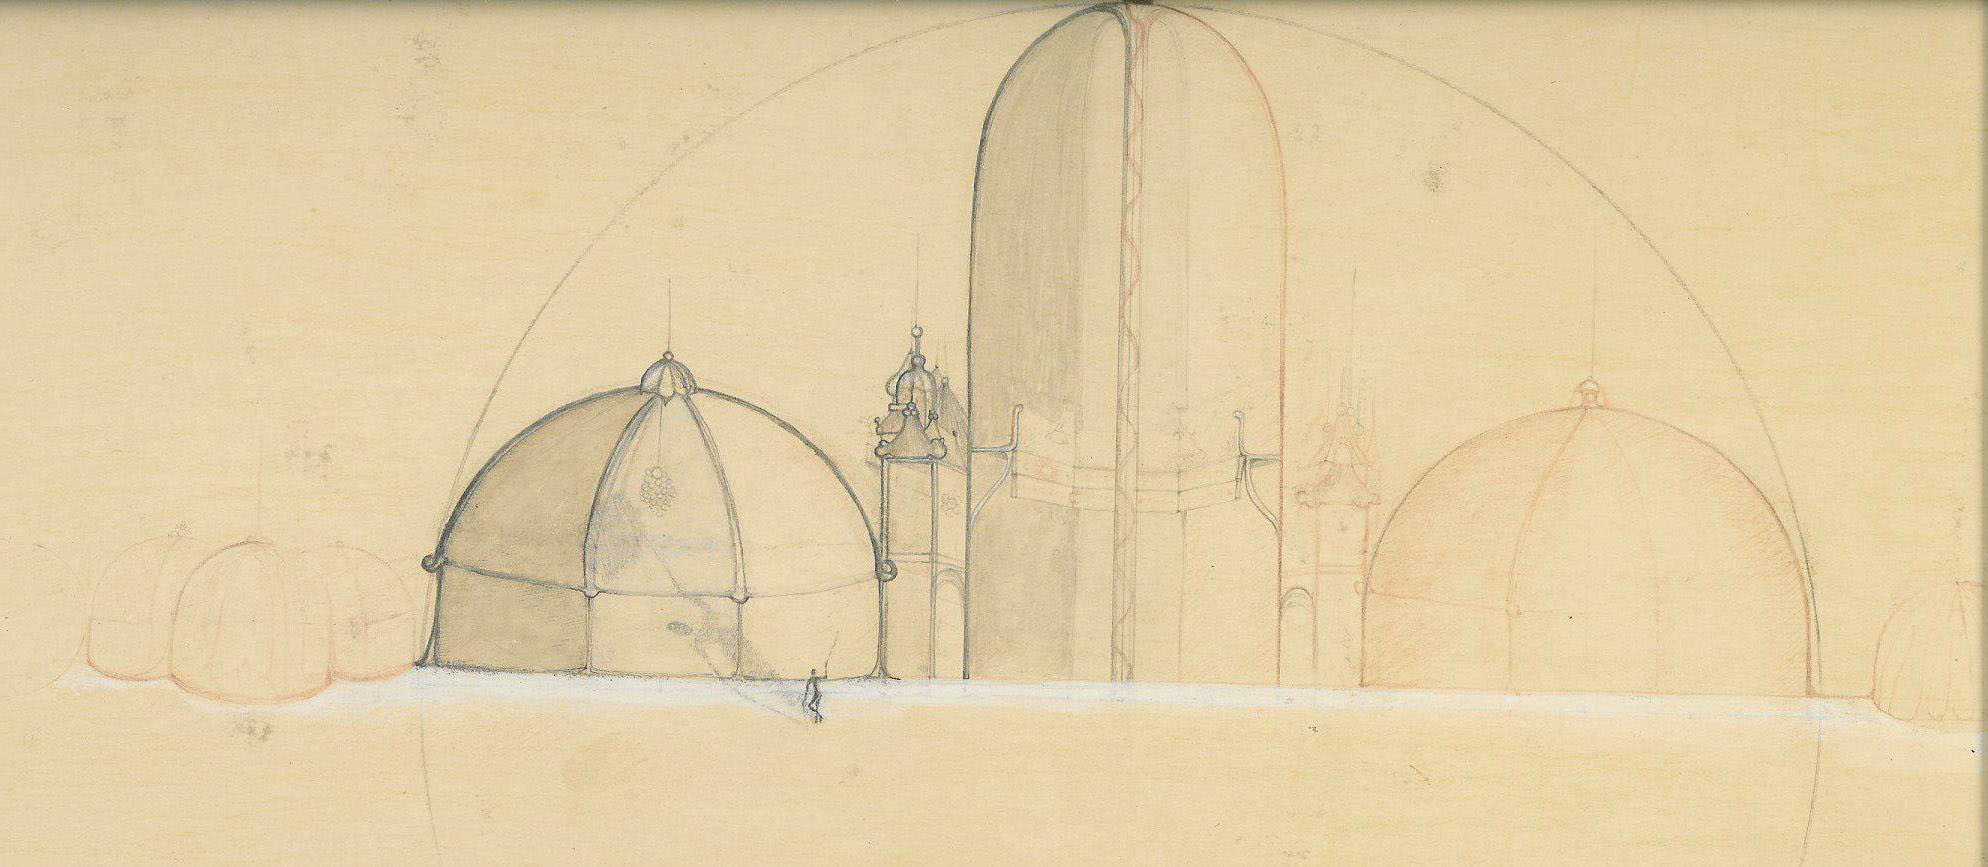 Drawing of several domes structures